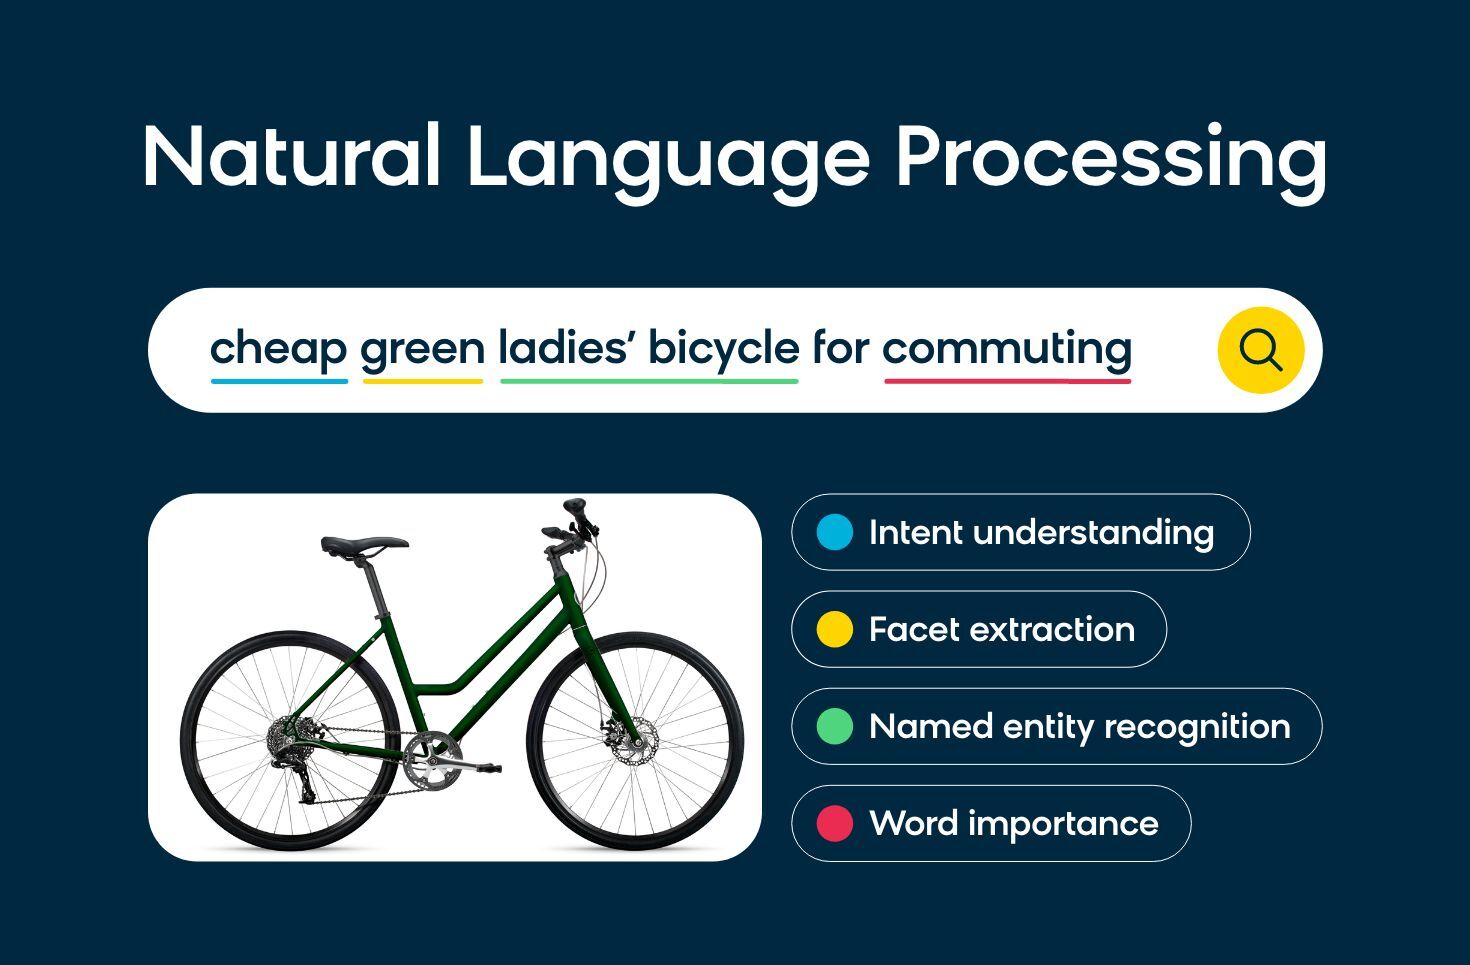 Search query "cheap green ladies' bicycle for commuting" broken down by natural language processing